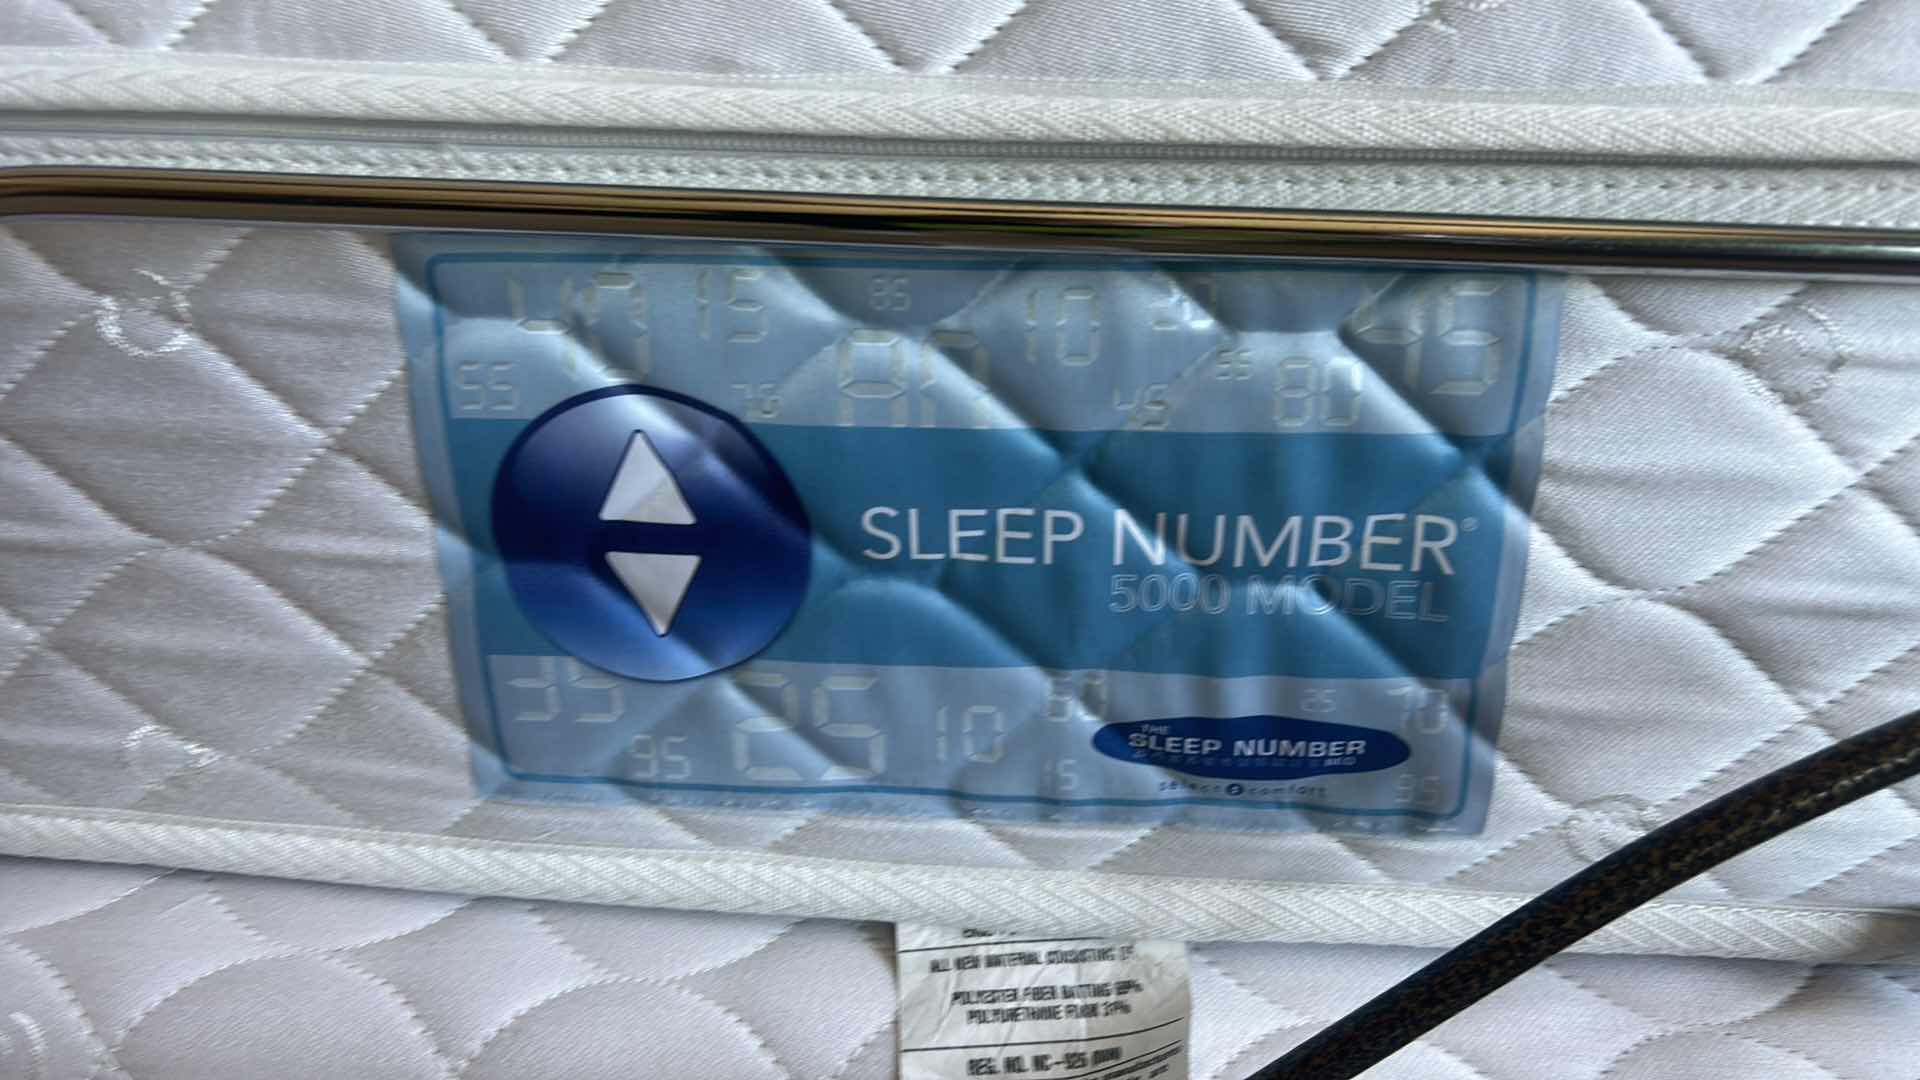 Photo 2 of 2 SLEEP NUMBER TWIN MATTRESS 5000 MODEL WITH BOX SPRINGS